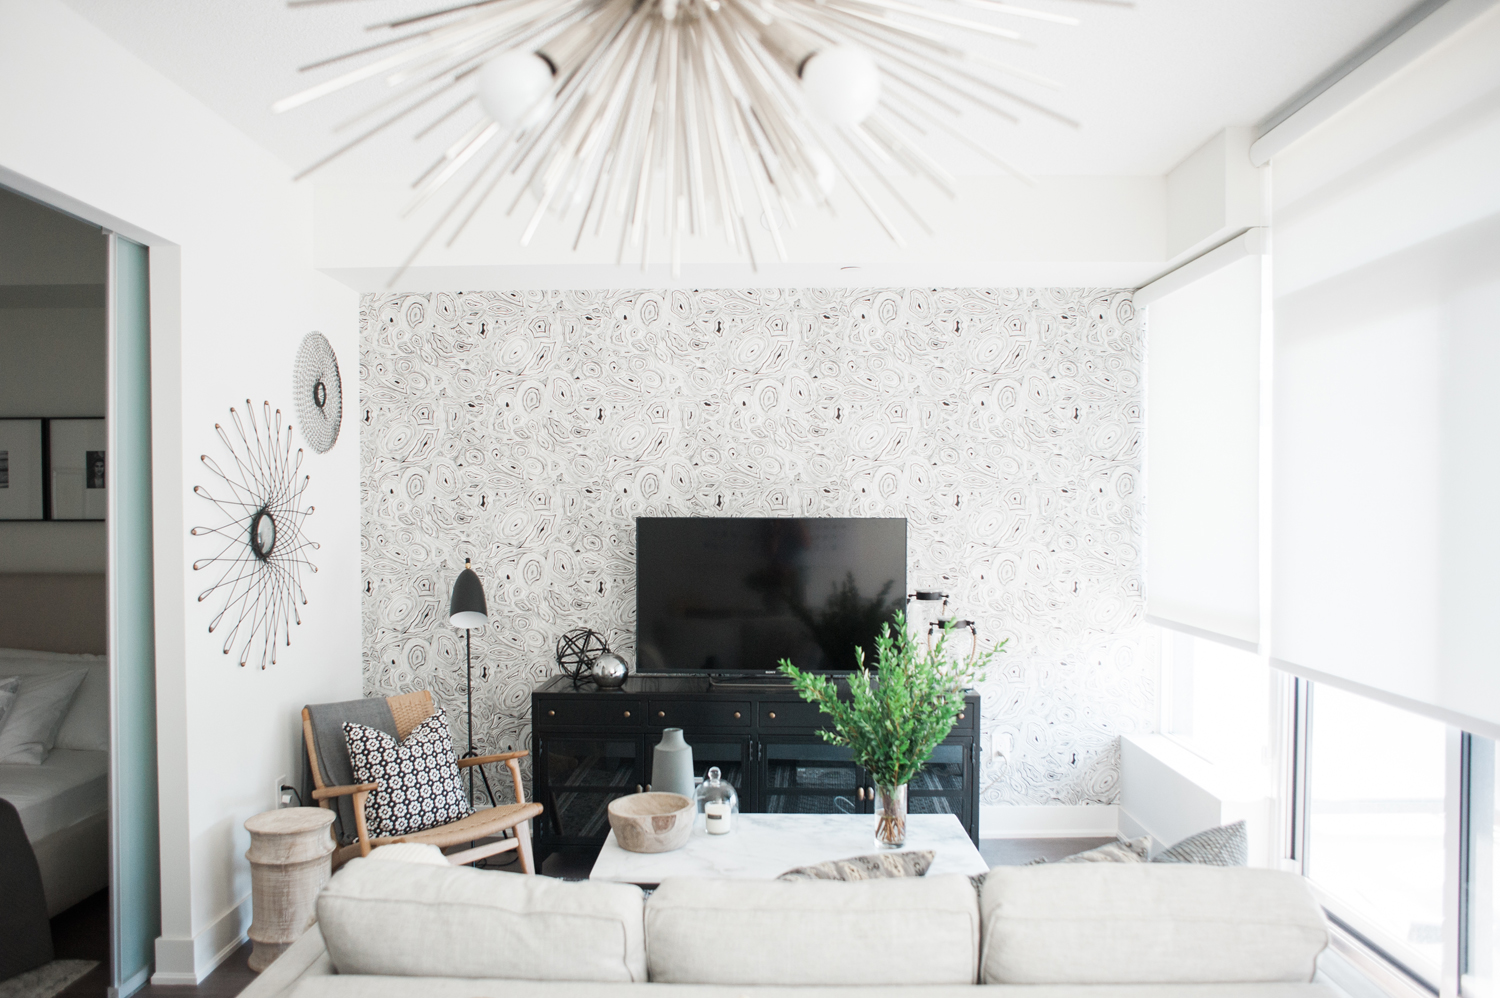 Modern white living room with black-and-white patterned accent wall.